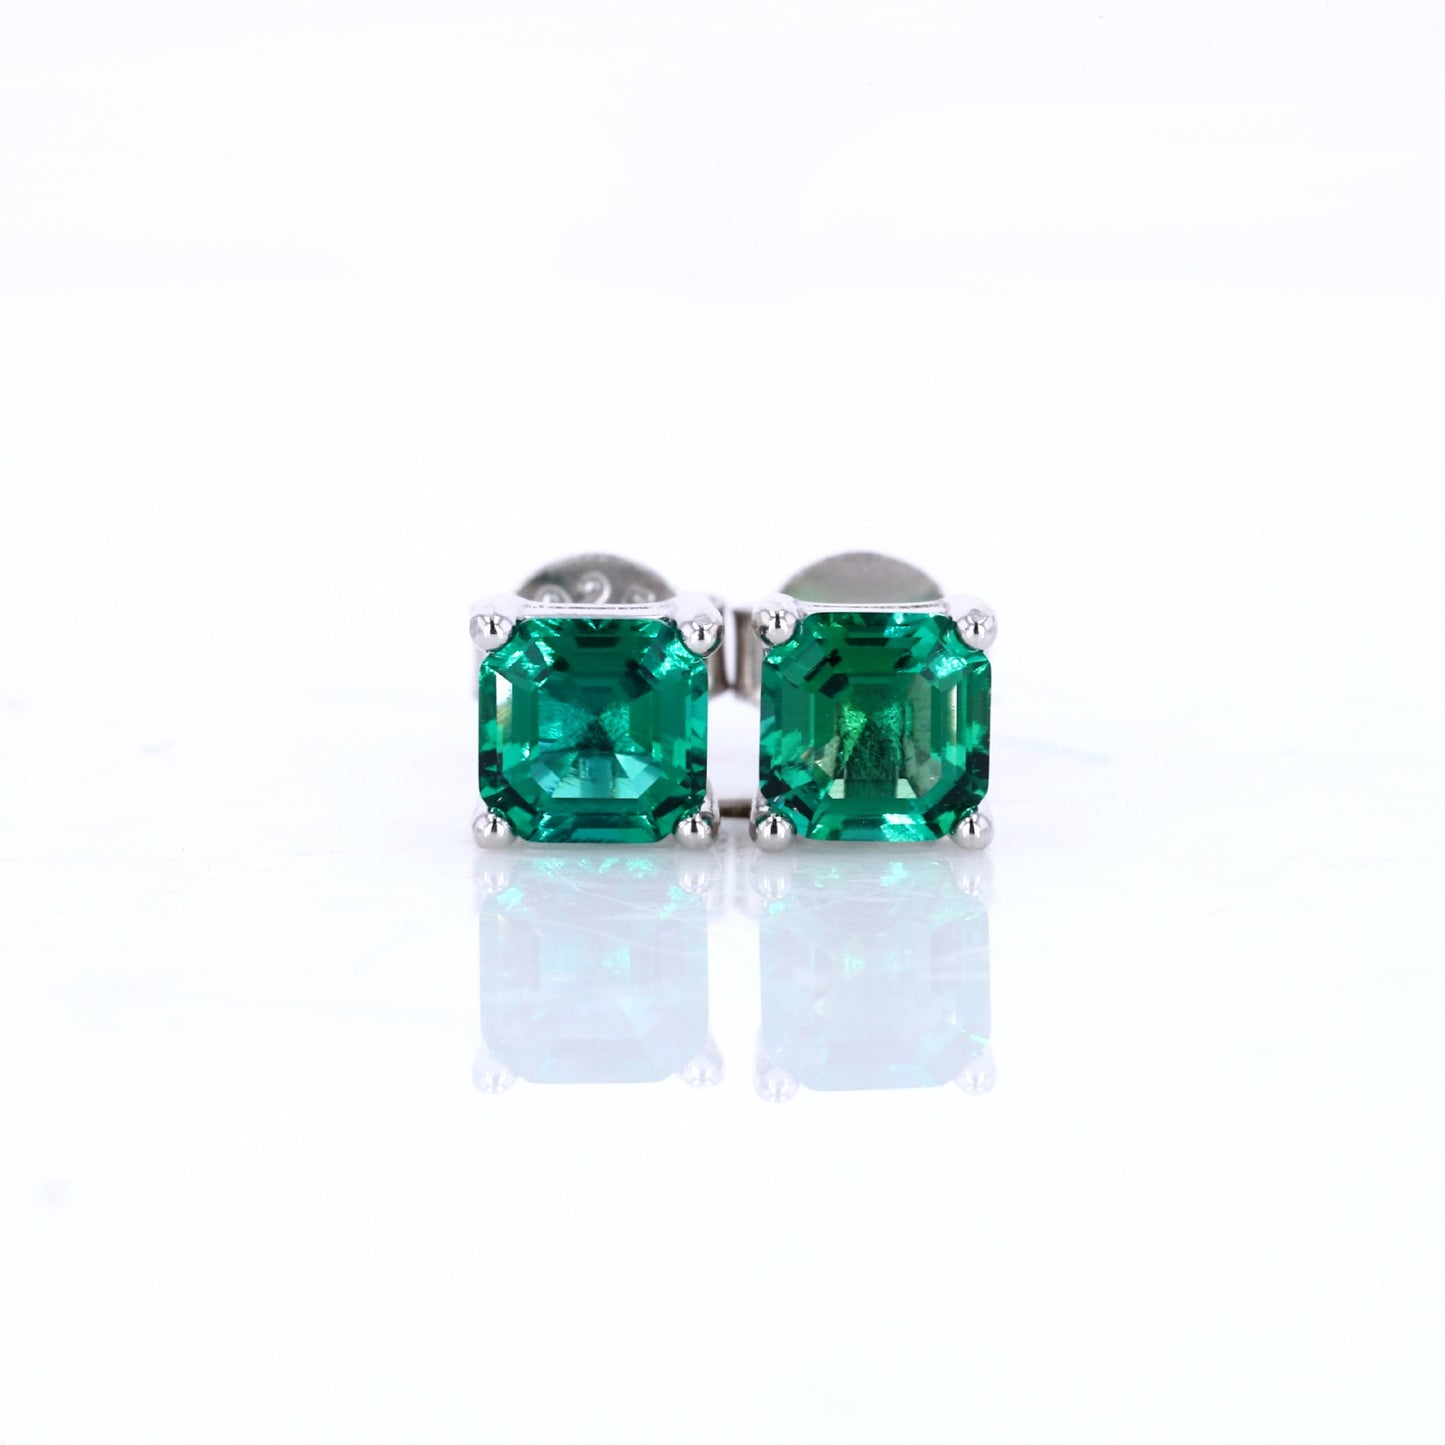 50 Points*2pcs Recycled Columbia Emerald Stud Earrings S925 Silver Electroplated K Gold emerald earrings Wikie Jewelry